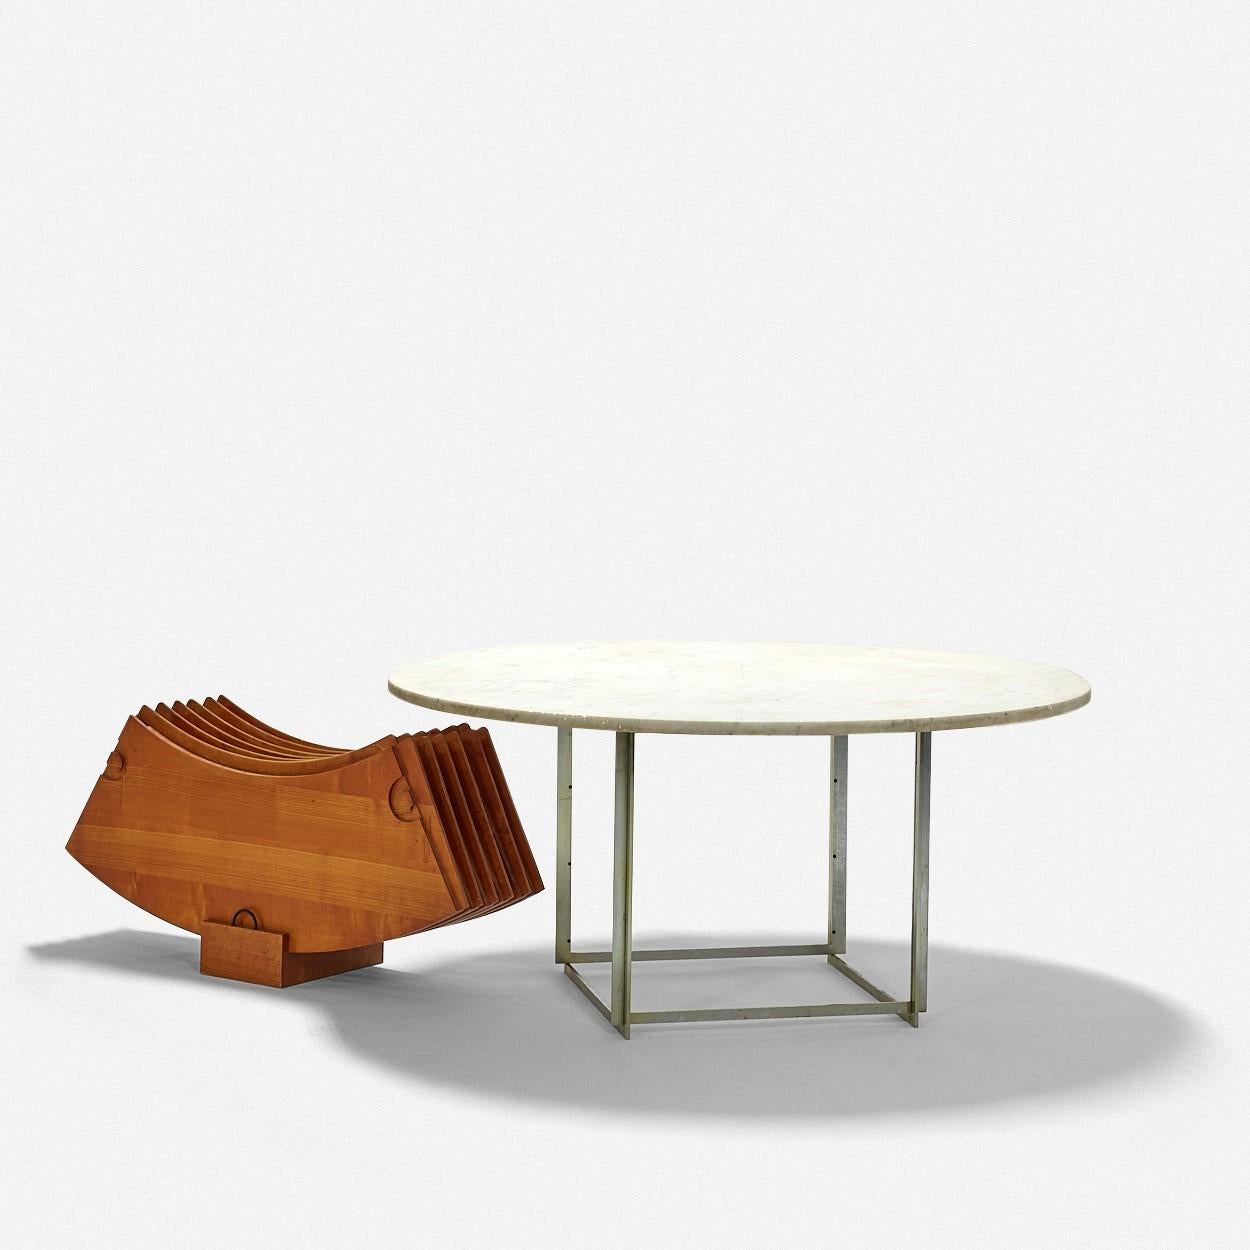 Poul Kjaerholm
PK 54 dining table with extension leaves
E. Kold Christensen
Denmark, 1960s
flint-rolled marble, chrome-plated steel
Measures: 55 D × 24.5 H inches (83-inch diameter with leaves).